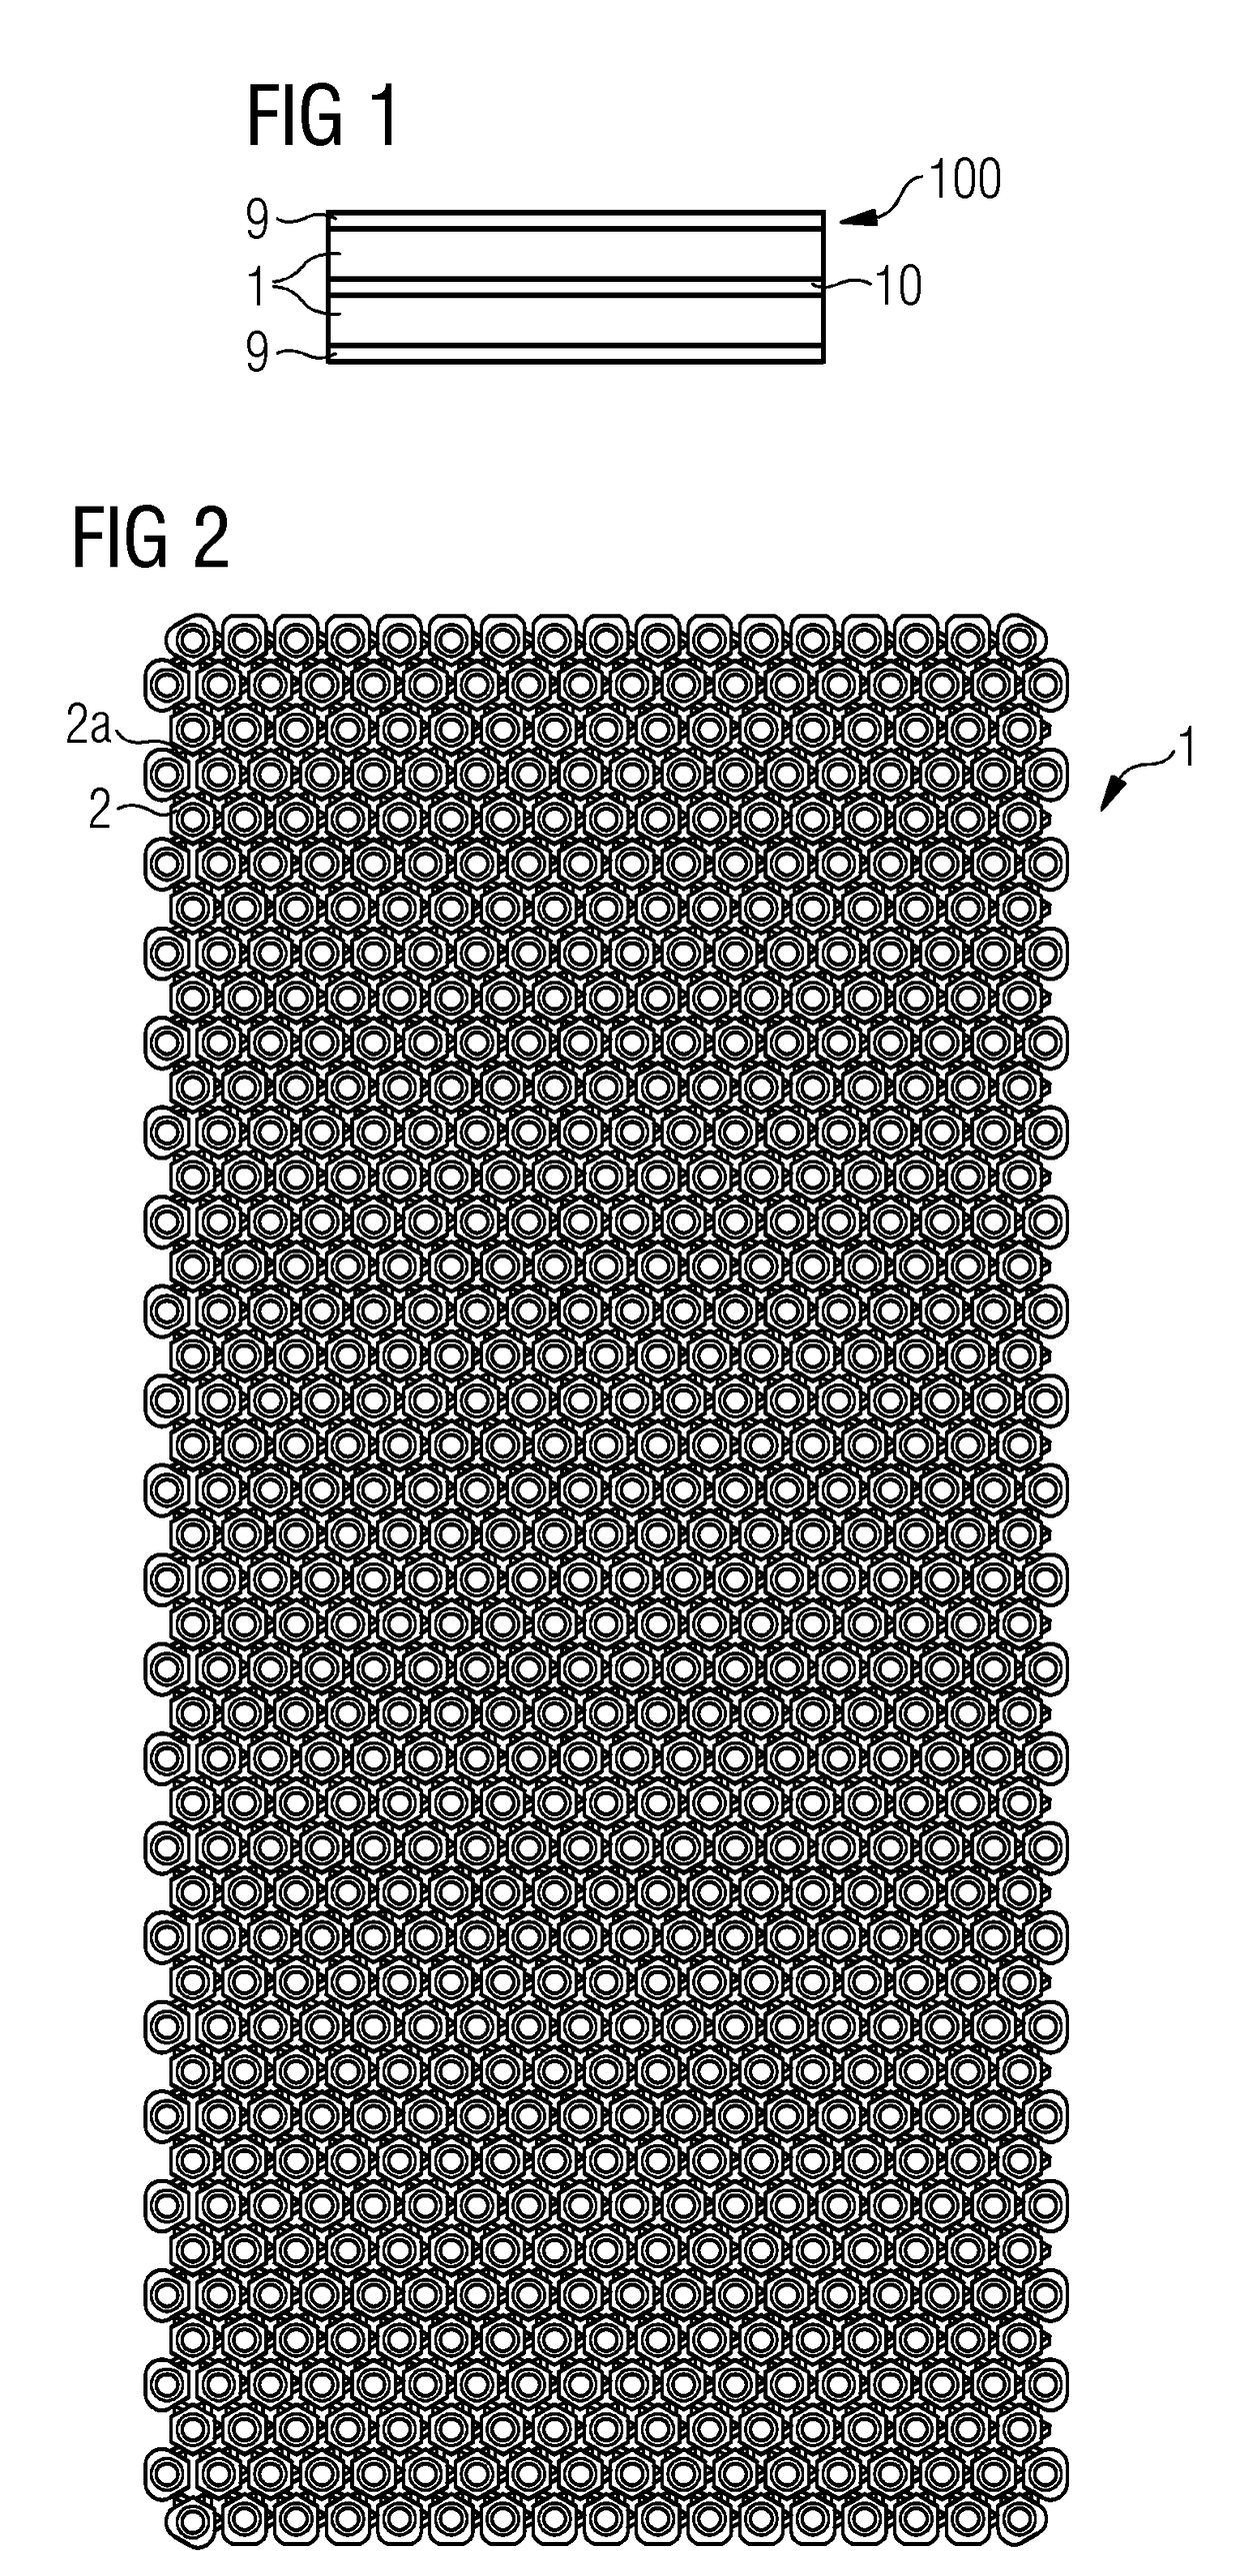 Magnetic resonance coil arrangement with adaptive coil spacing layer